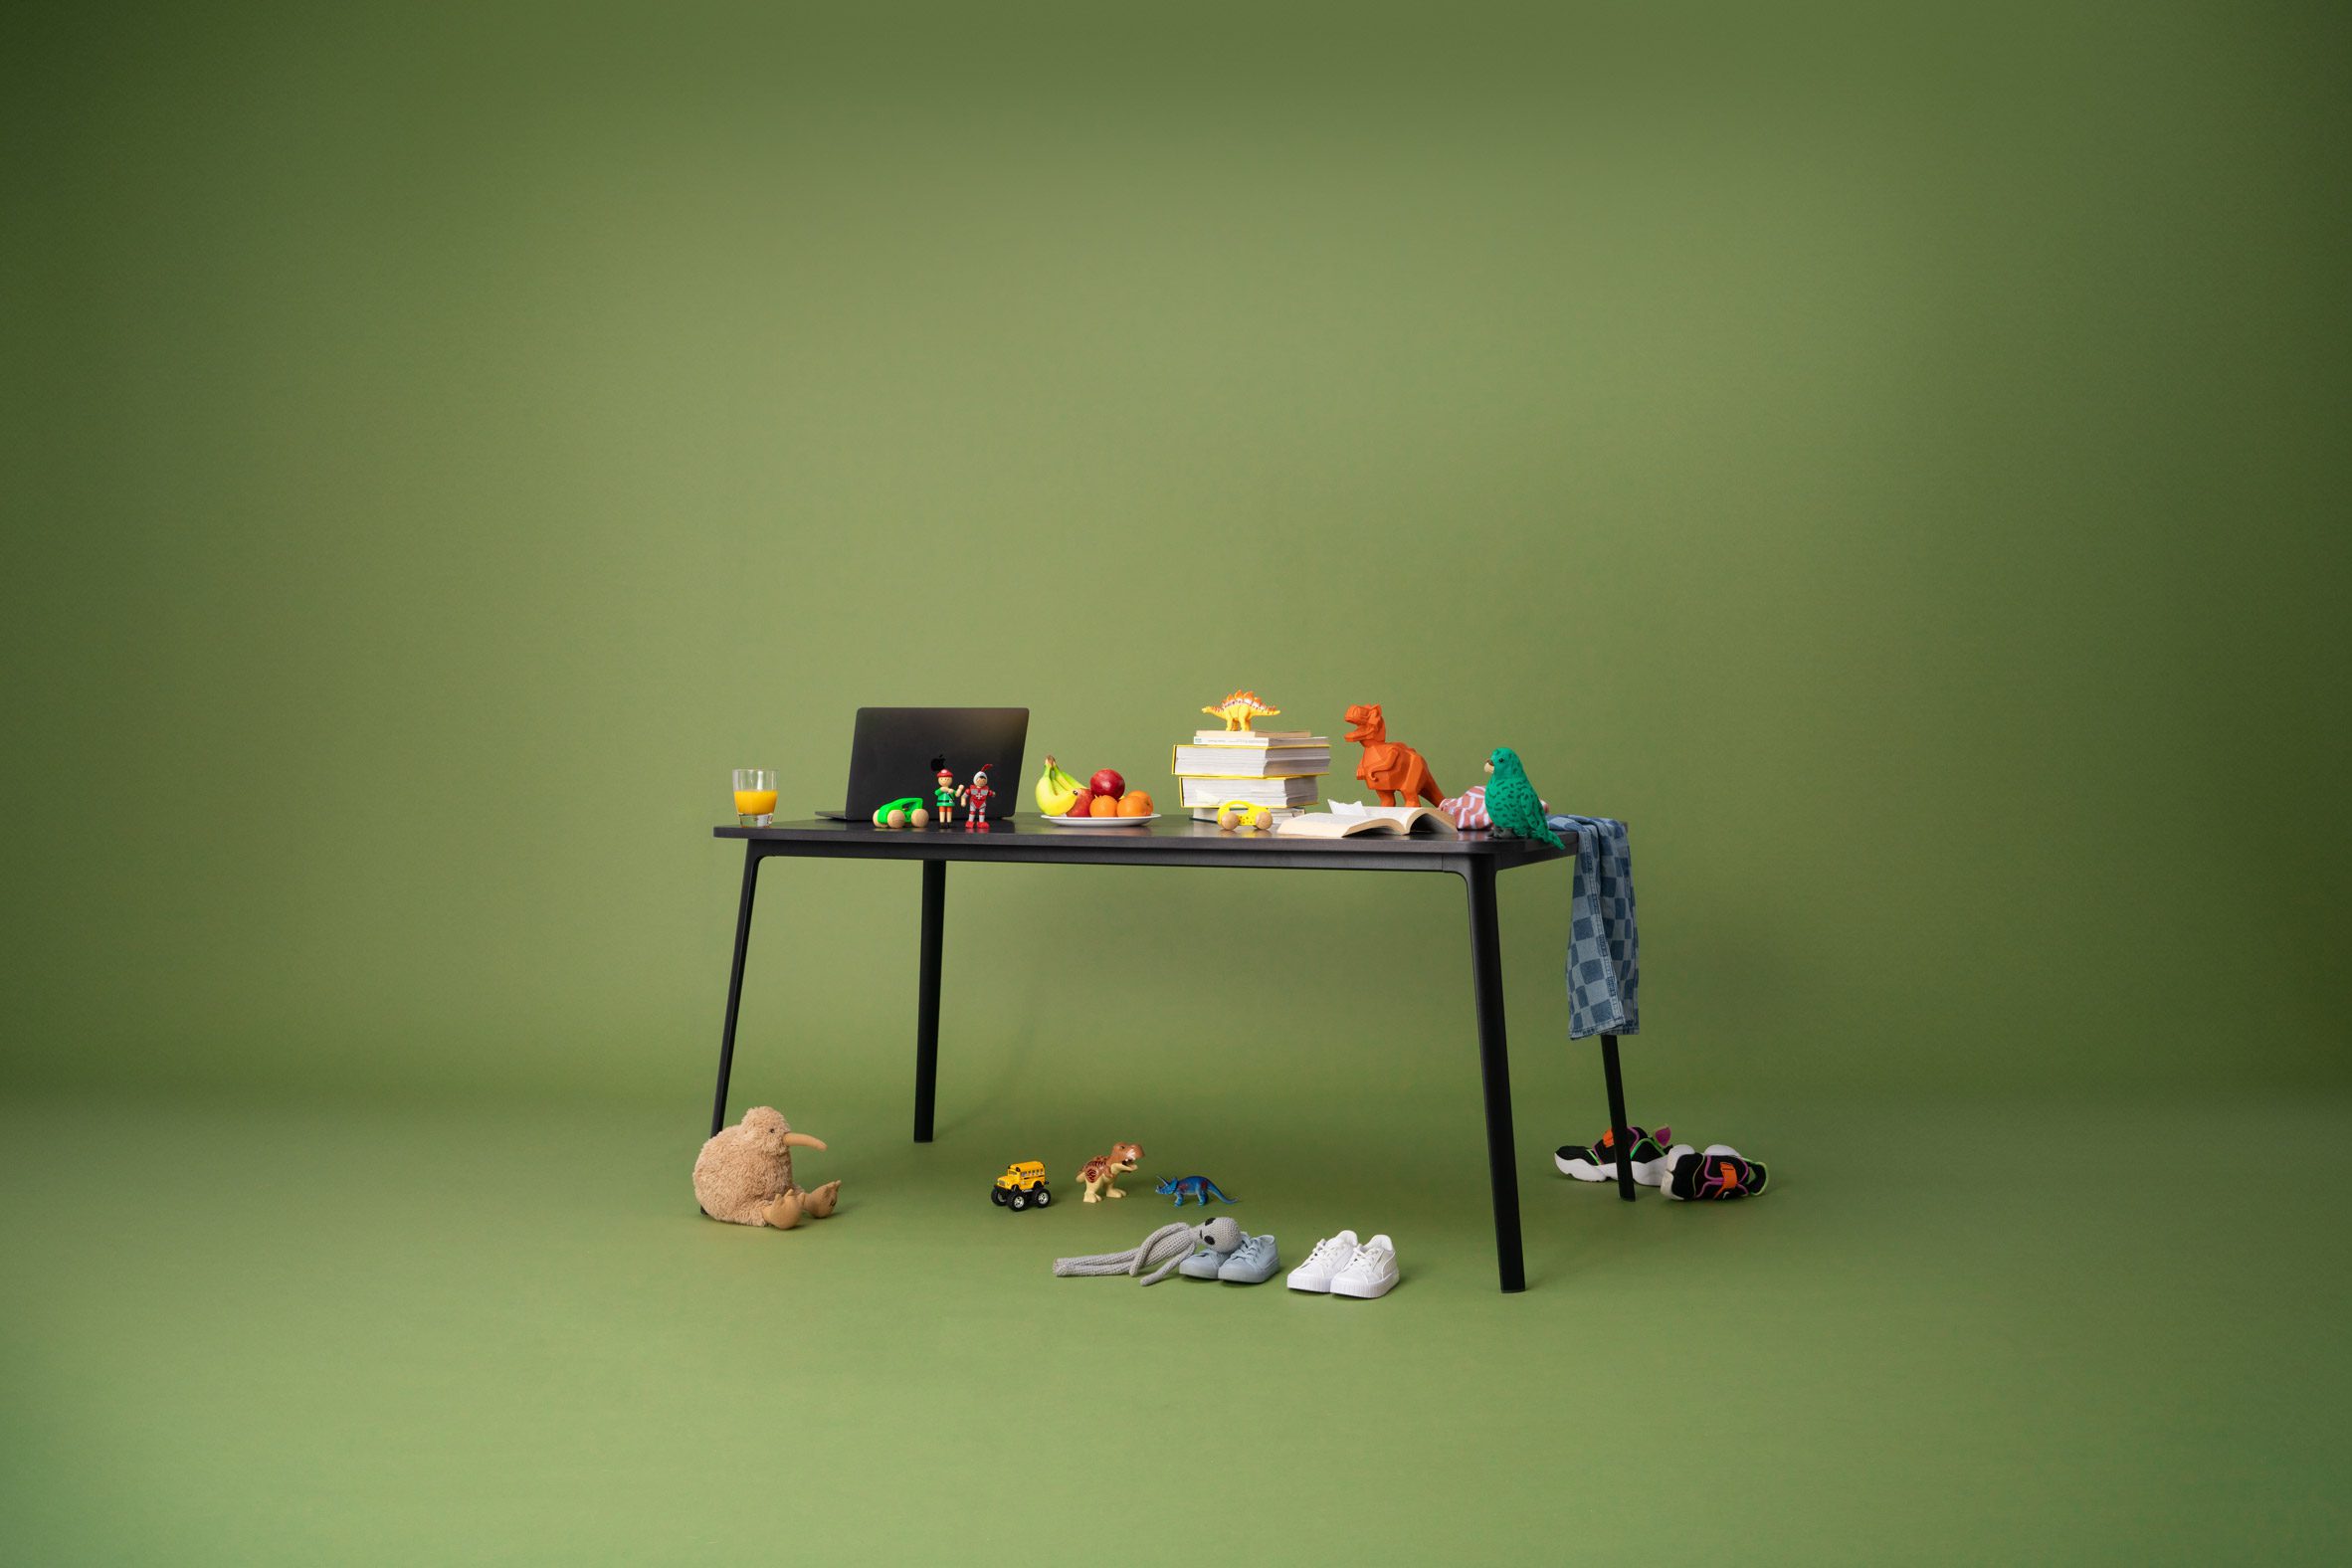 Table topped with a laptop and children's toys